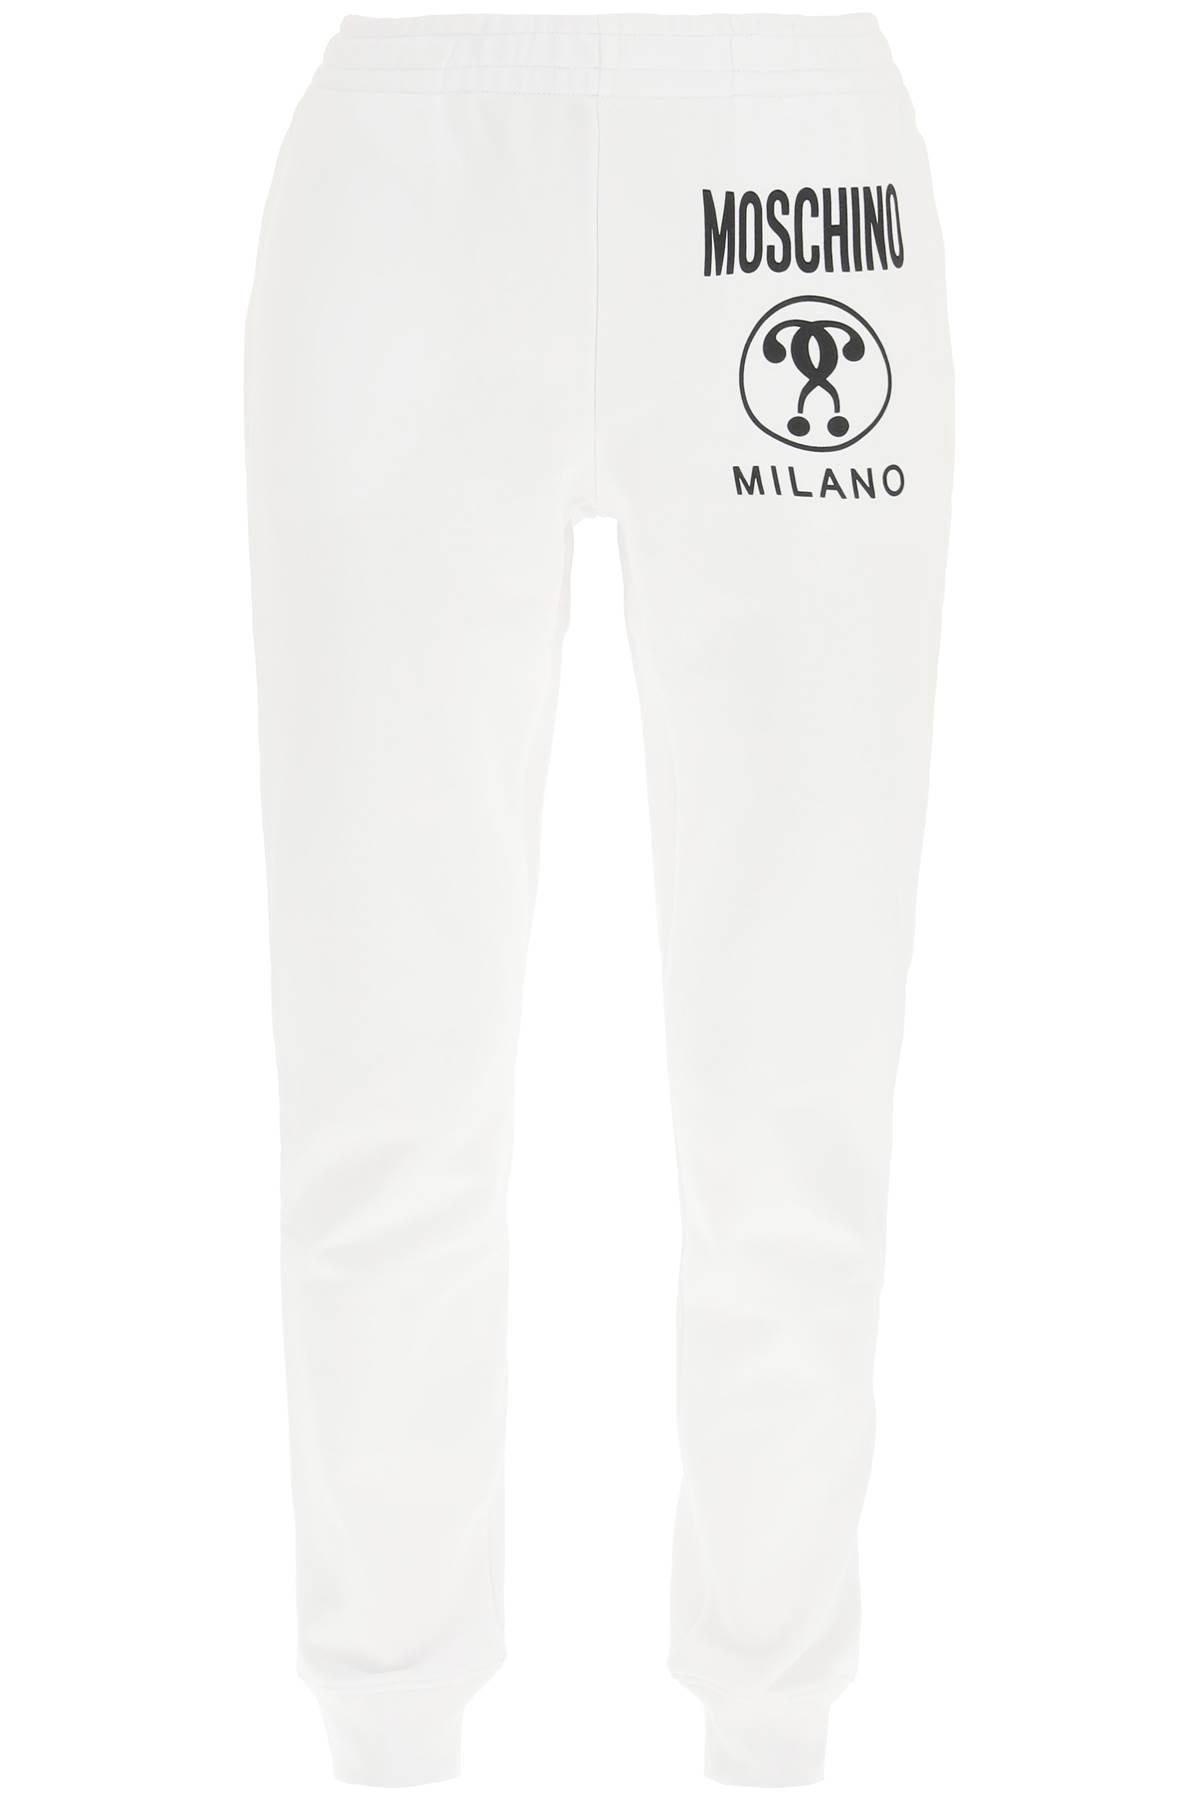 Moschino Cotton Double Question Mark Sweatpants in White - Save 24 